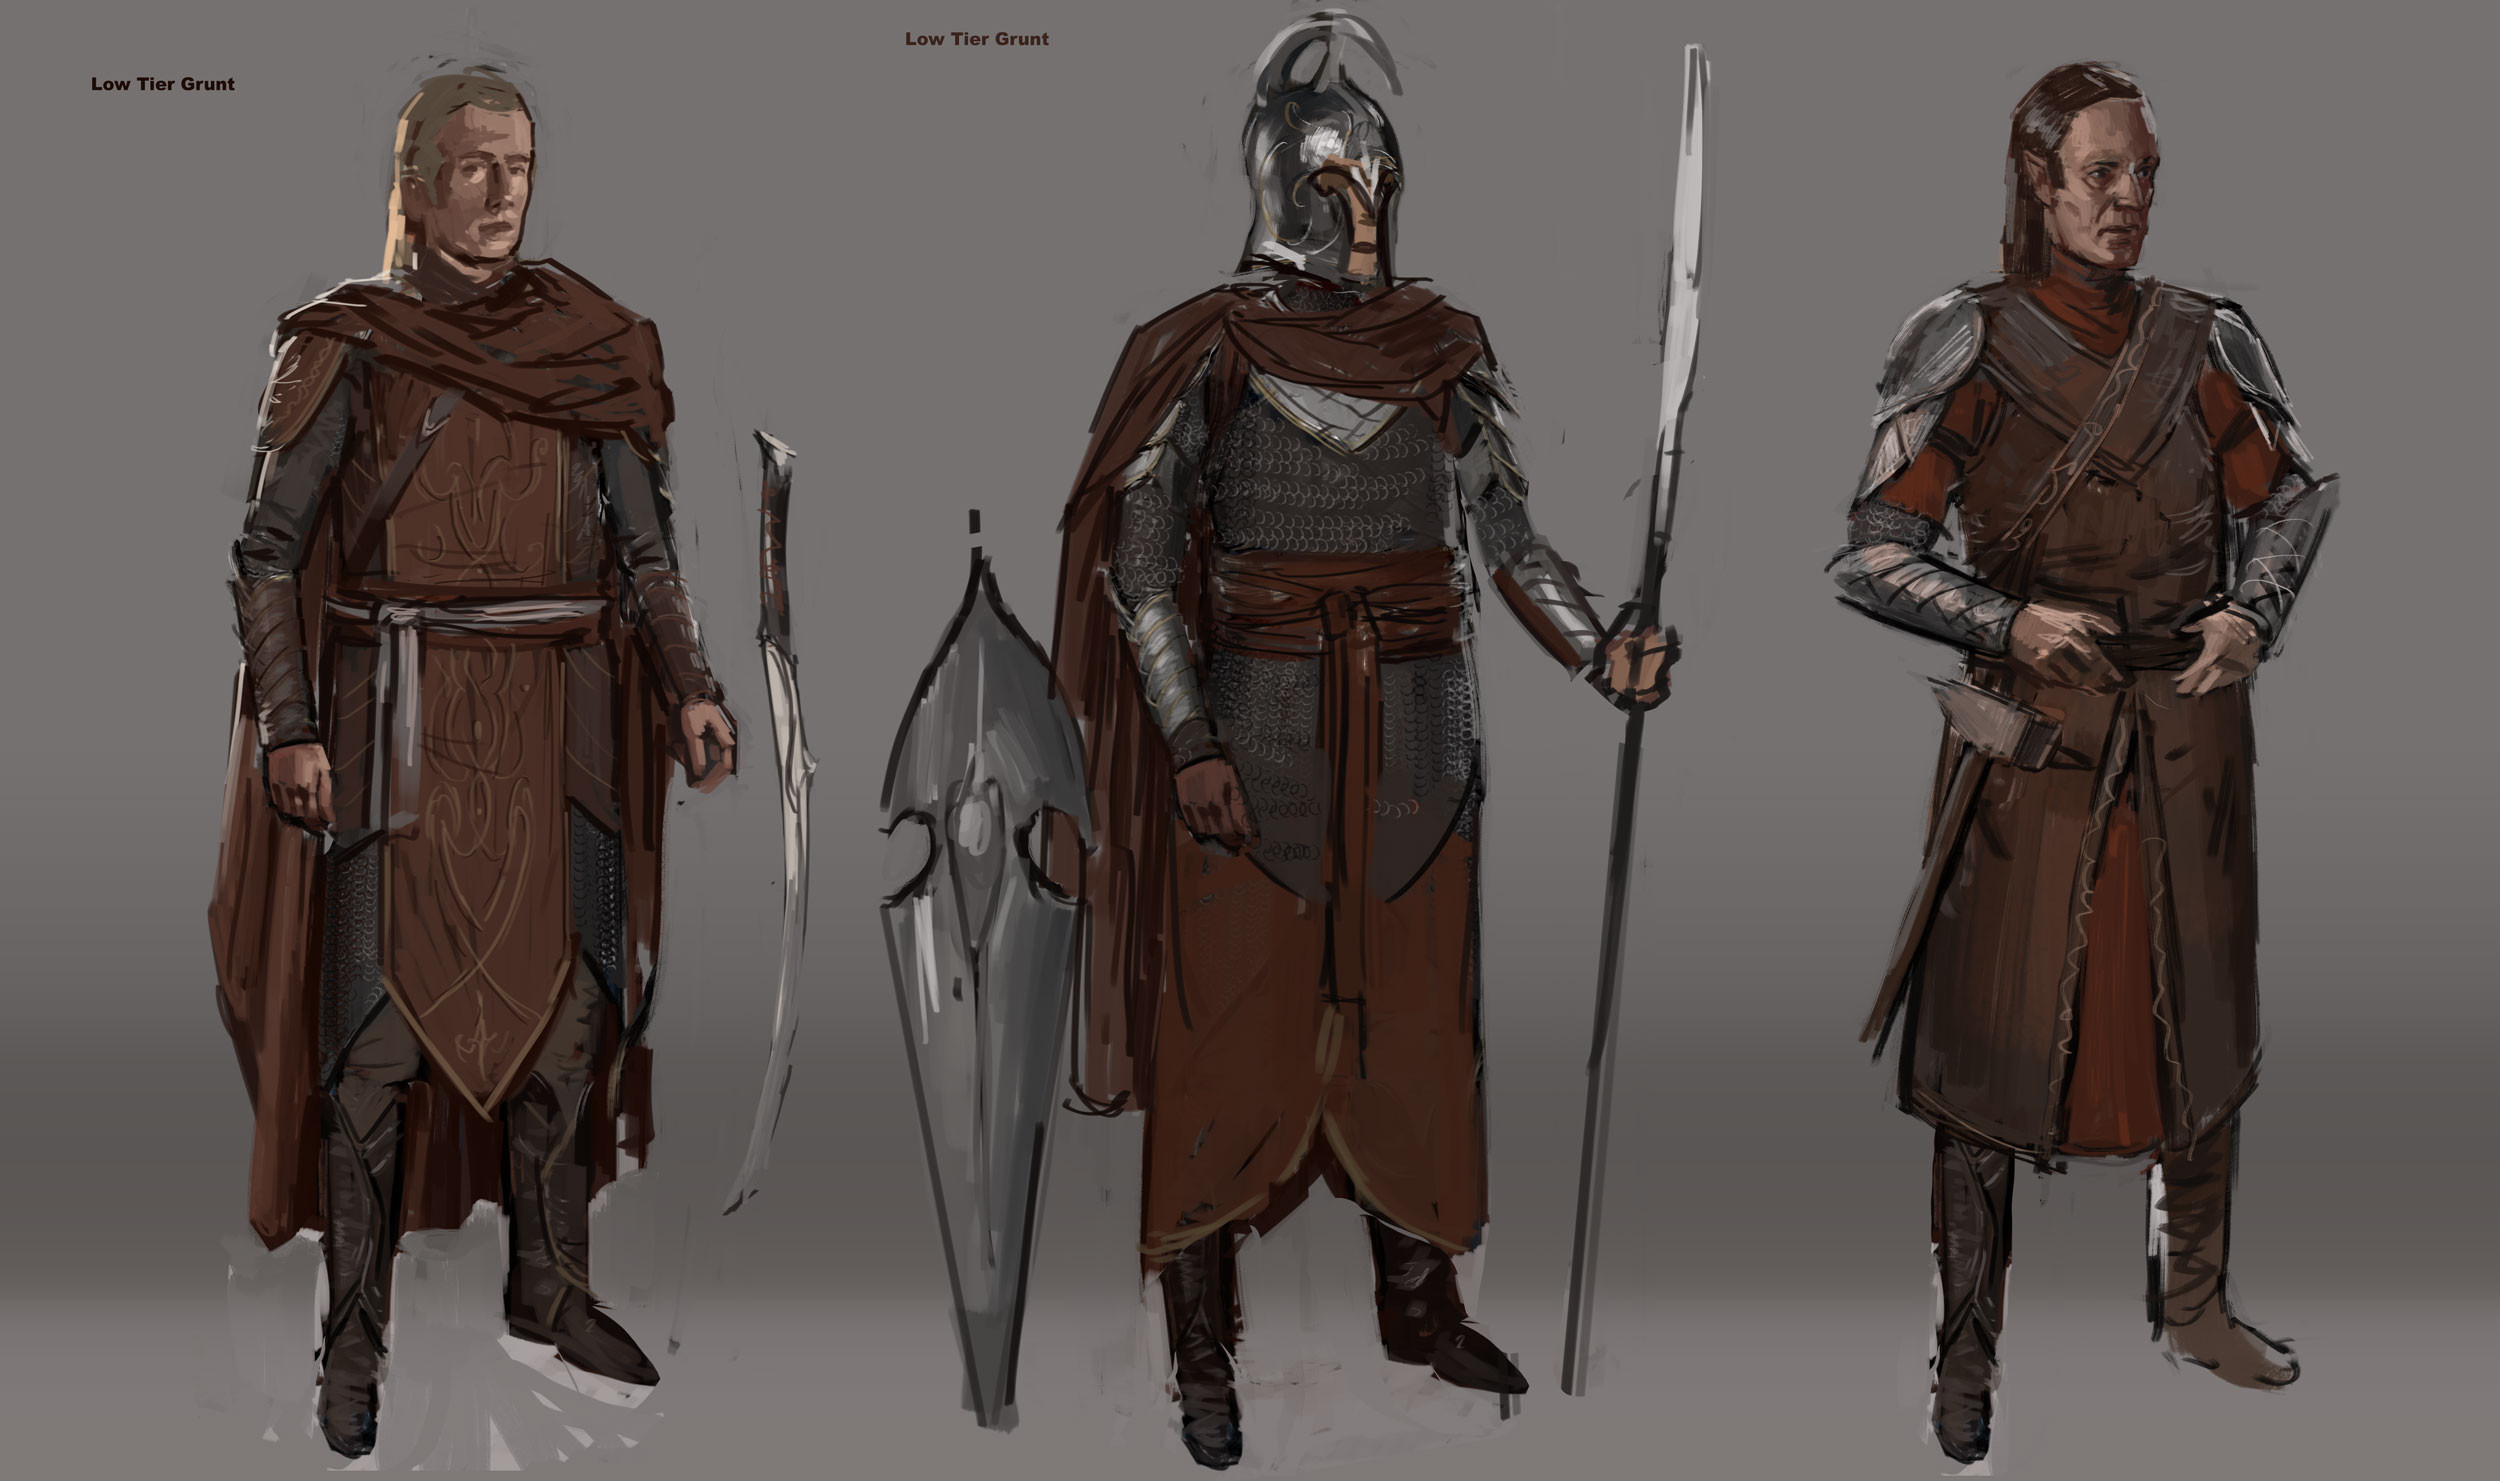 Early sketches of lower tier units.